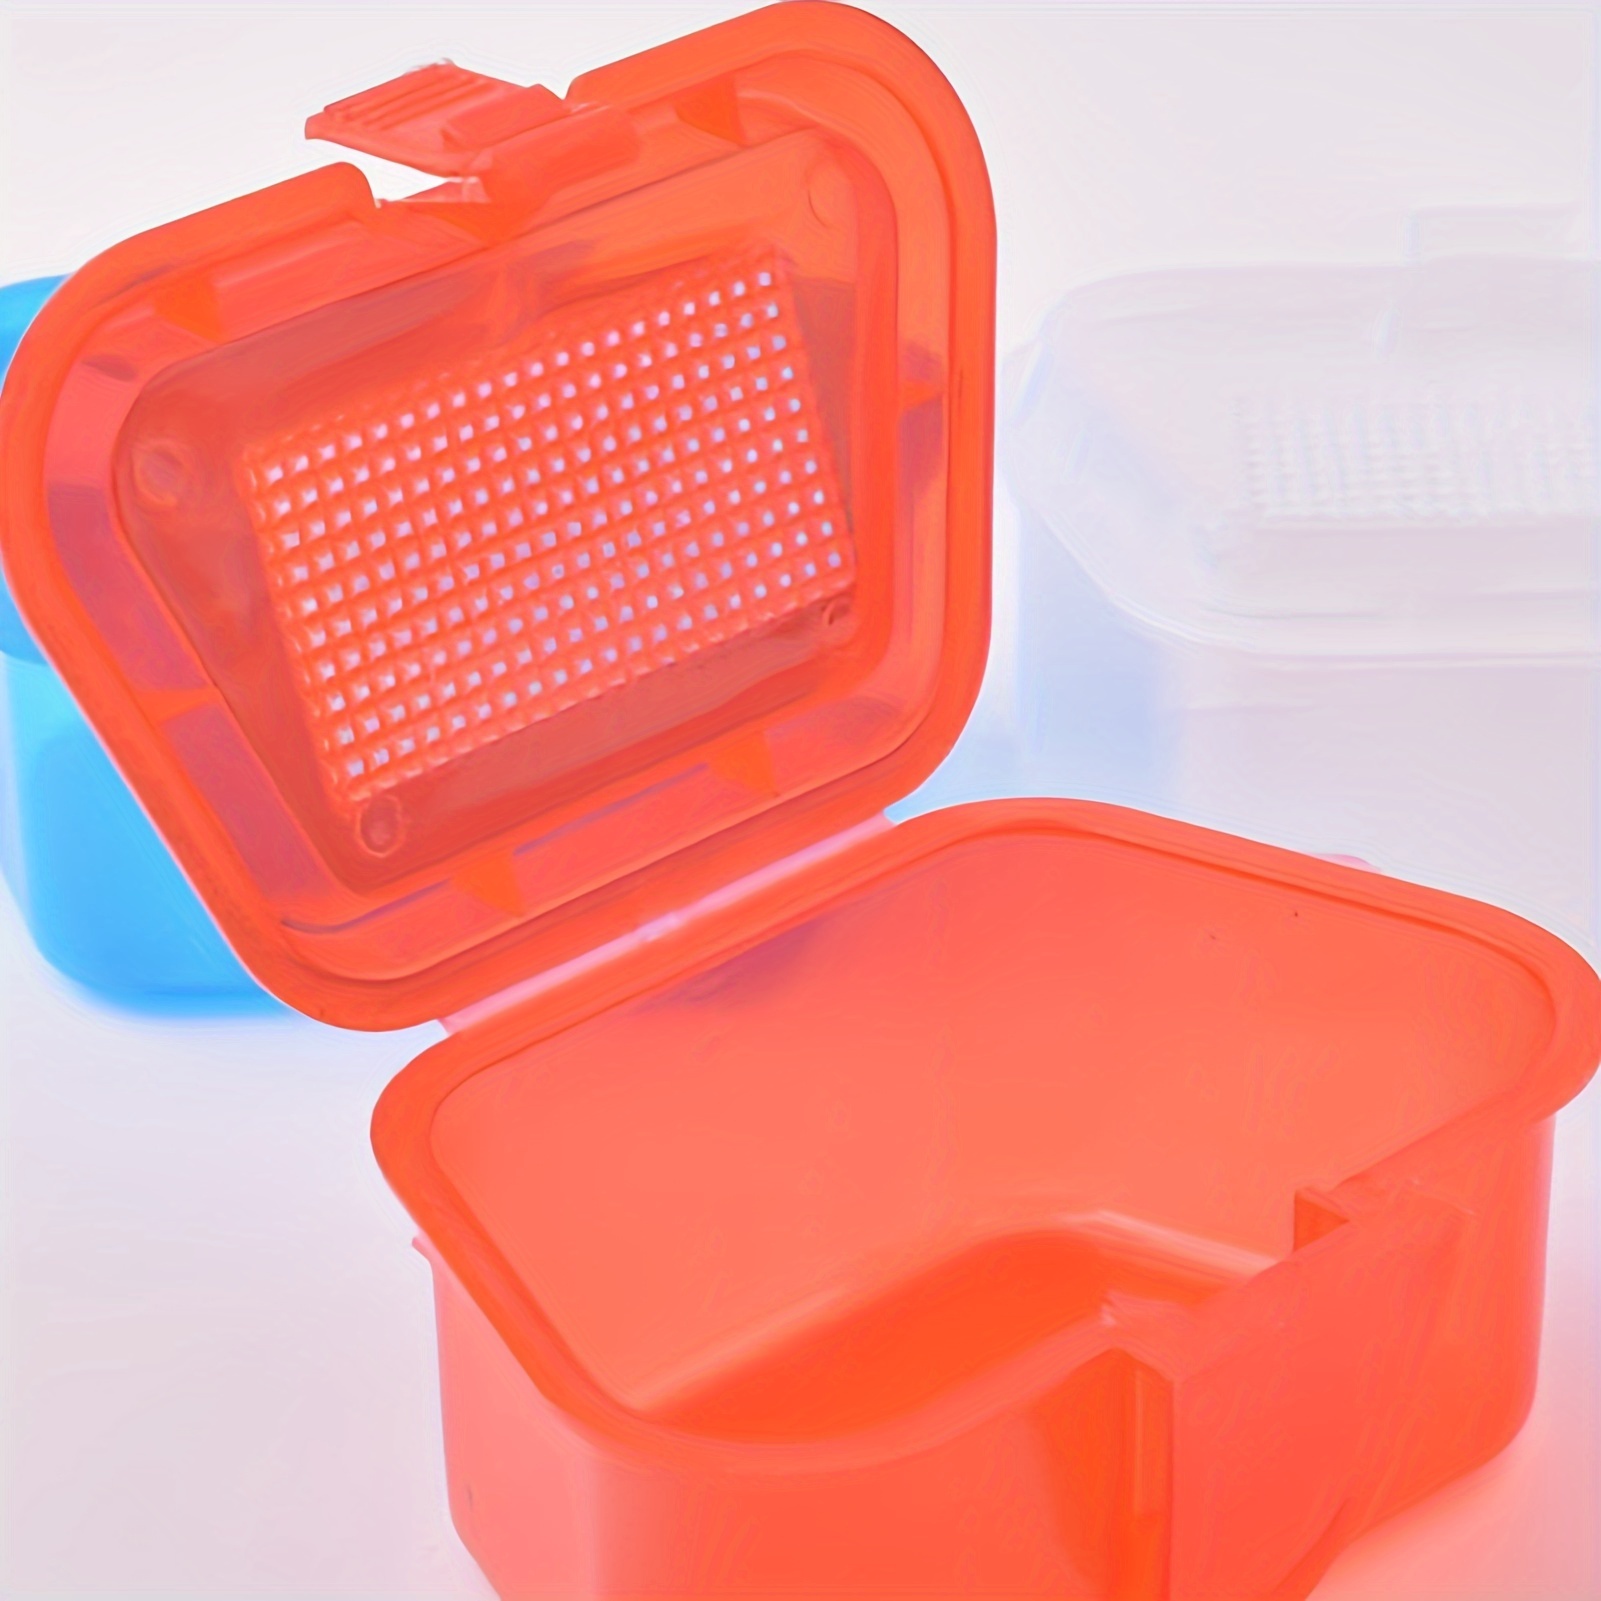 1pc Plastic Storage Box For Live Bait, Crush-proof Storage Container To  Keep Your Bait Fresh (Random Color)